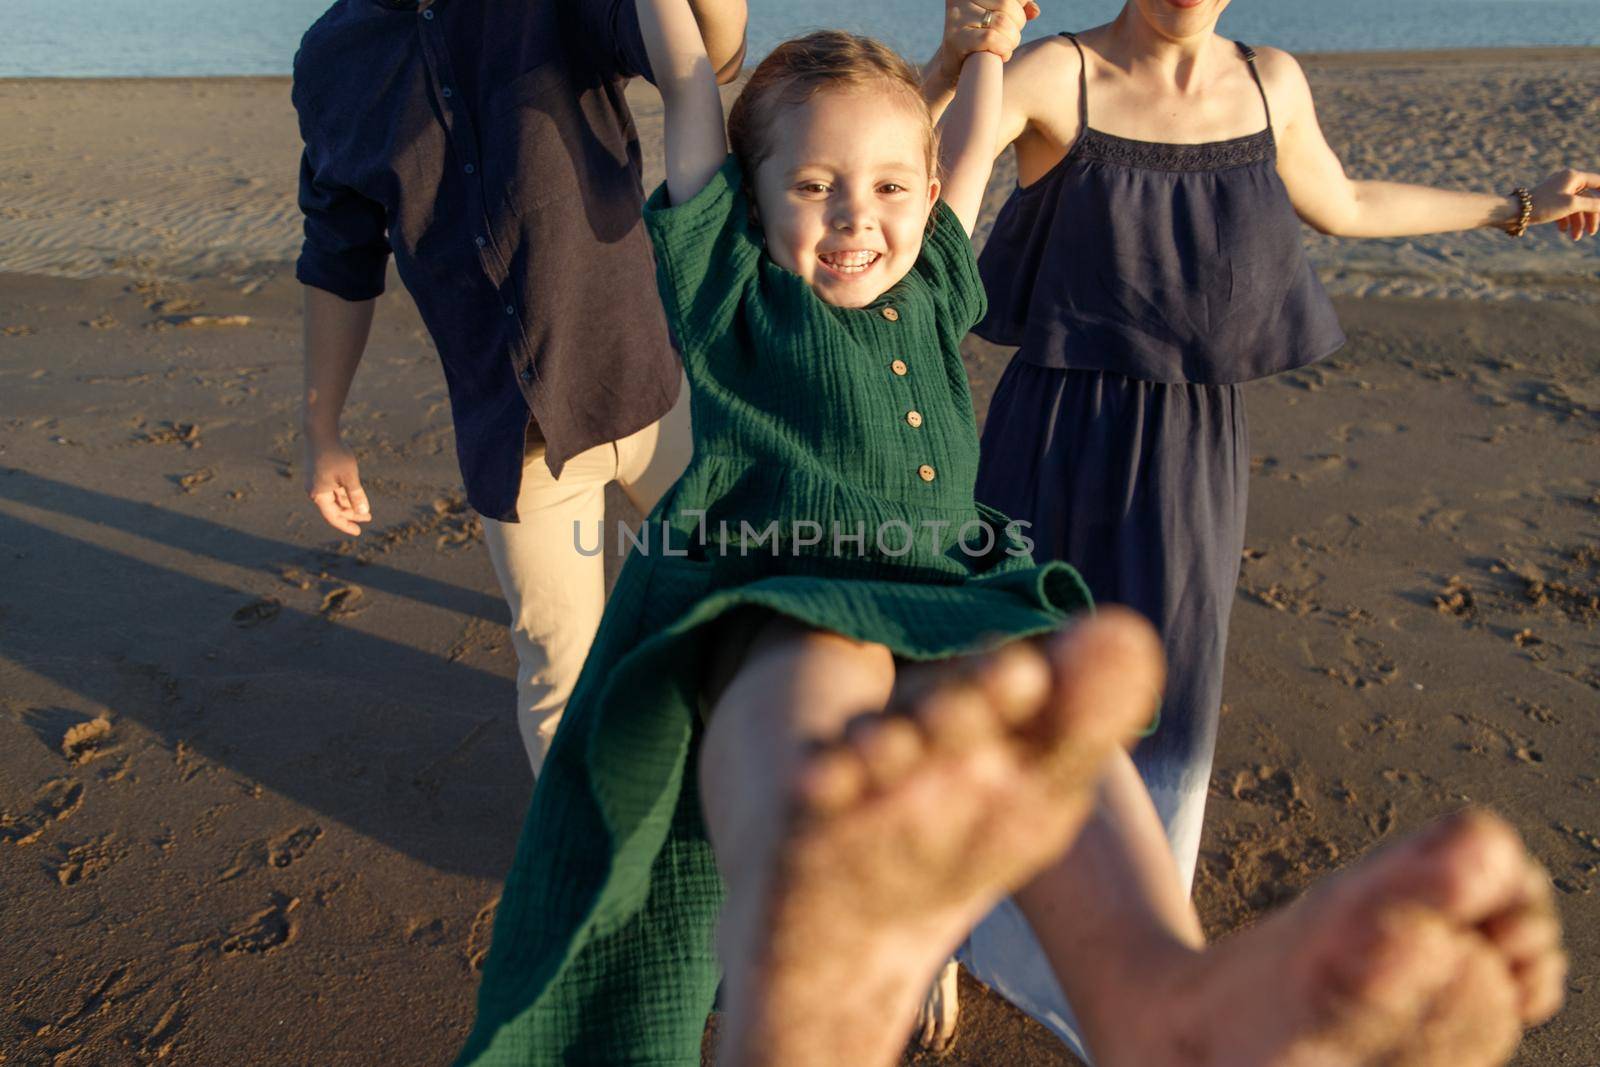 Fun portrait of a happy girl in a green dress swinging in the arms of her parents outdoor.